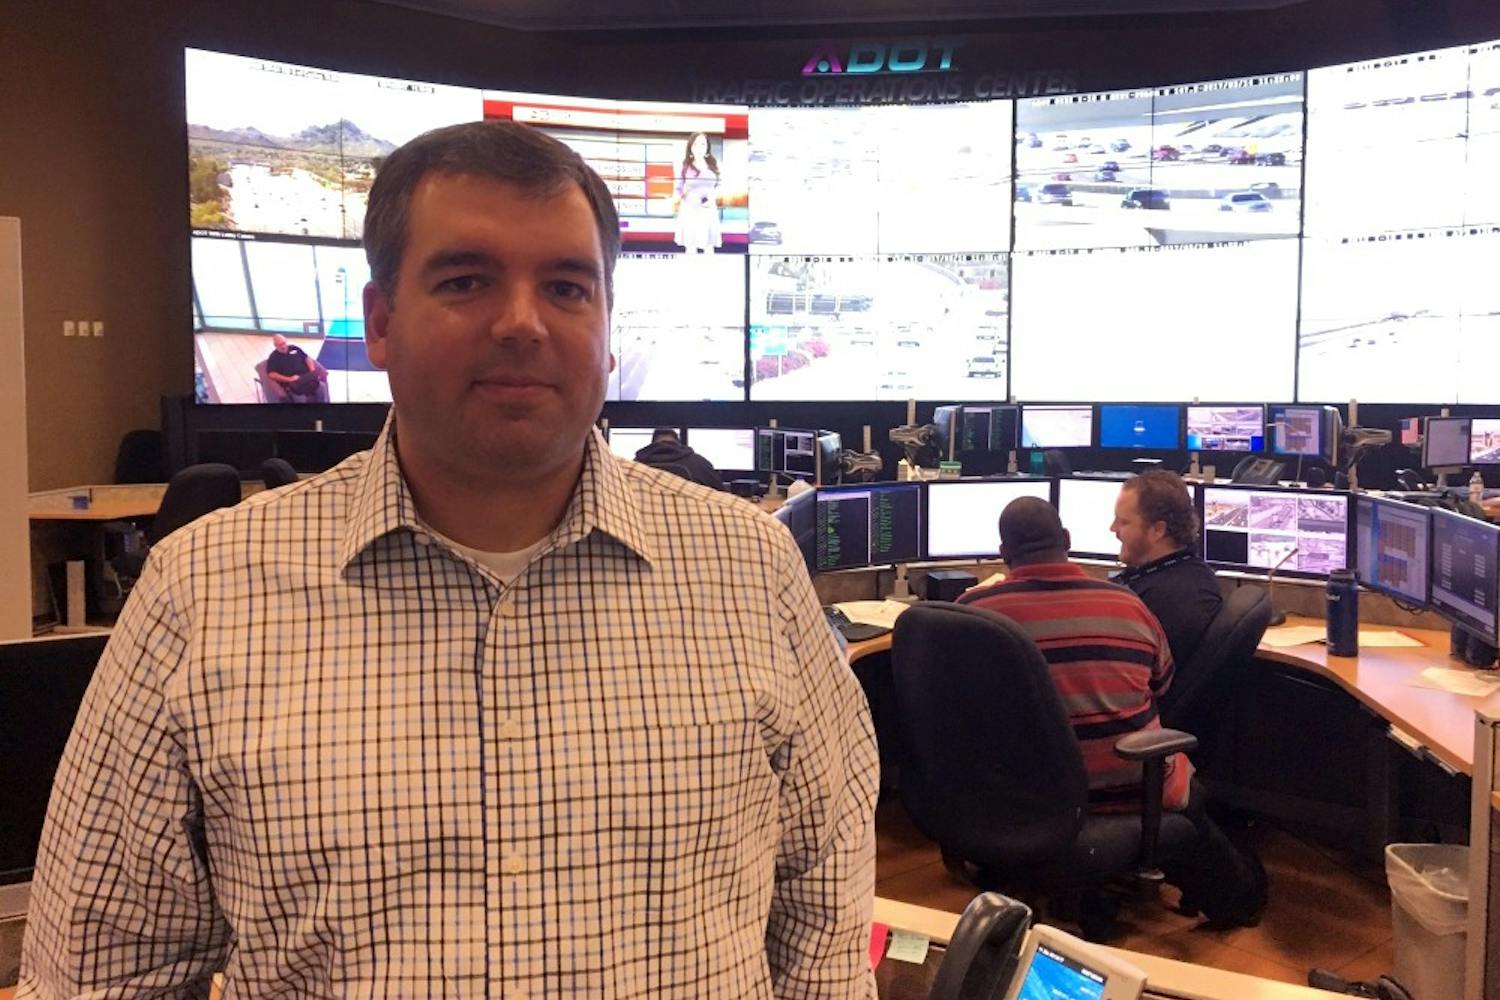 Arizona Department of Transport Transportation spokesperson Doug Pacey in the  ADOT monitoring room on Tuesday, March 14, 2017.